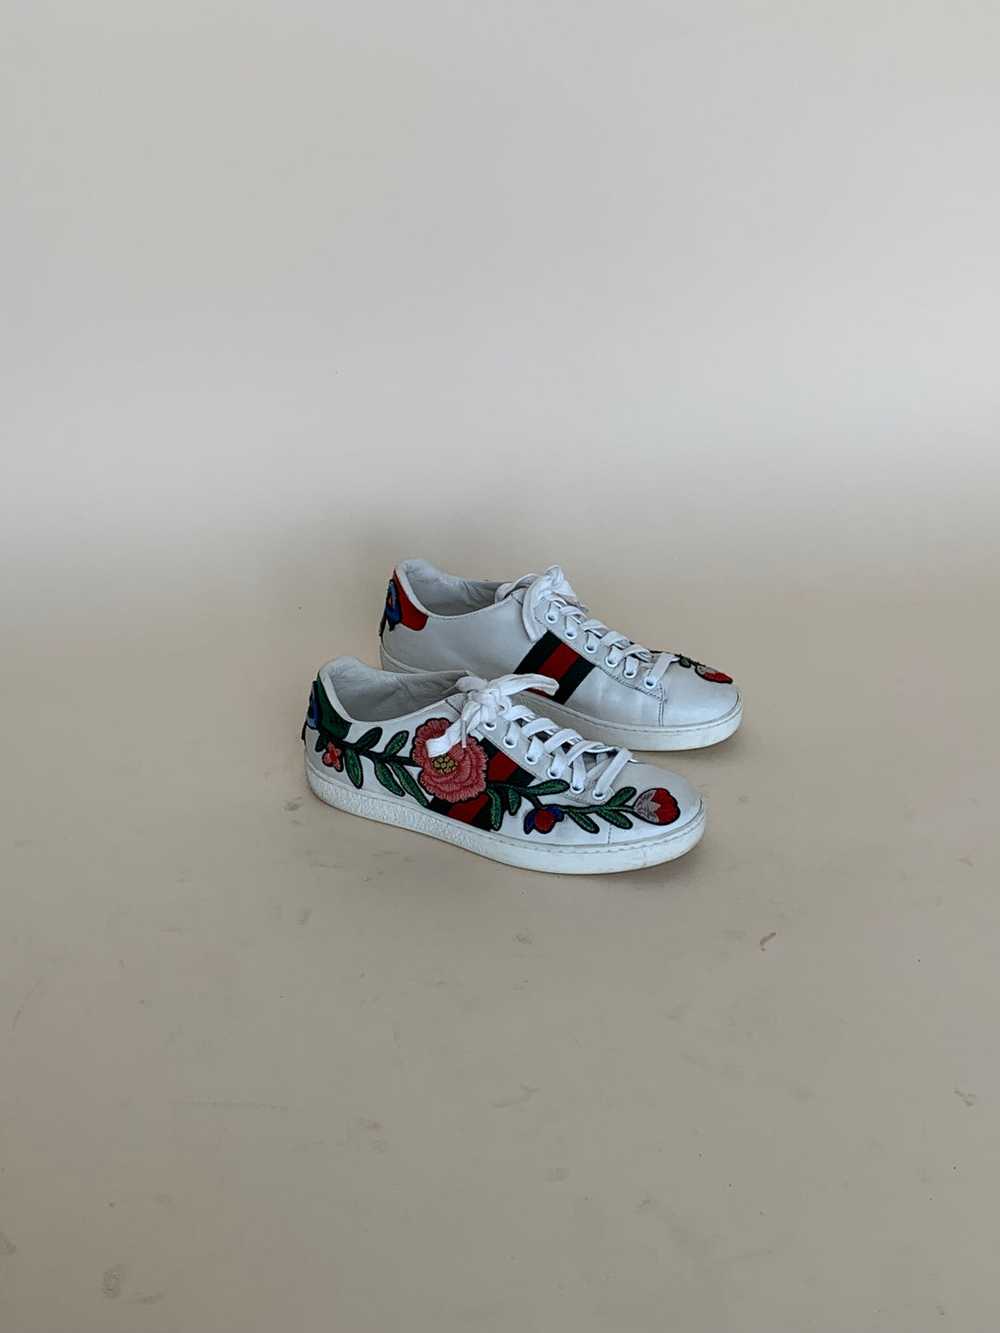 Gucci floral Ace sneaker - image 1